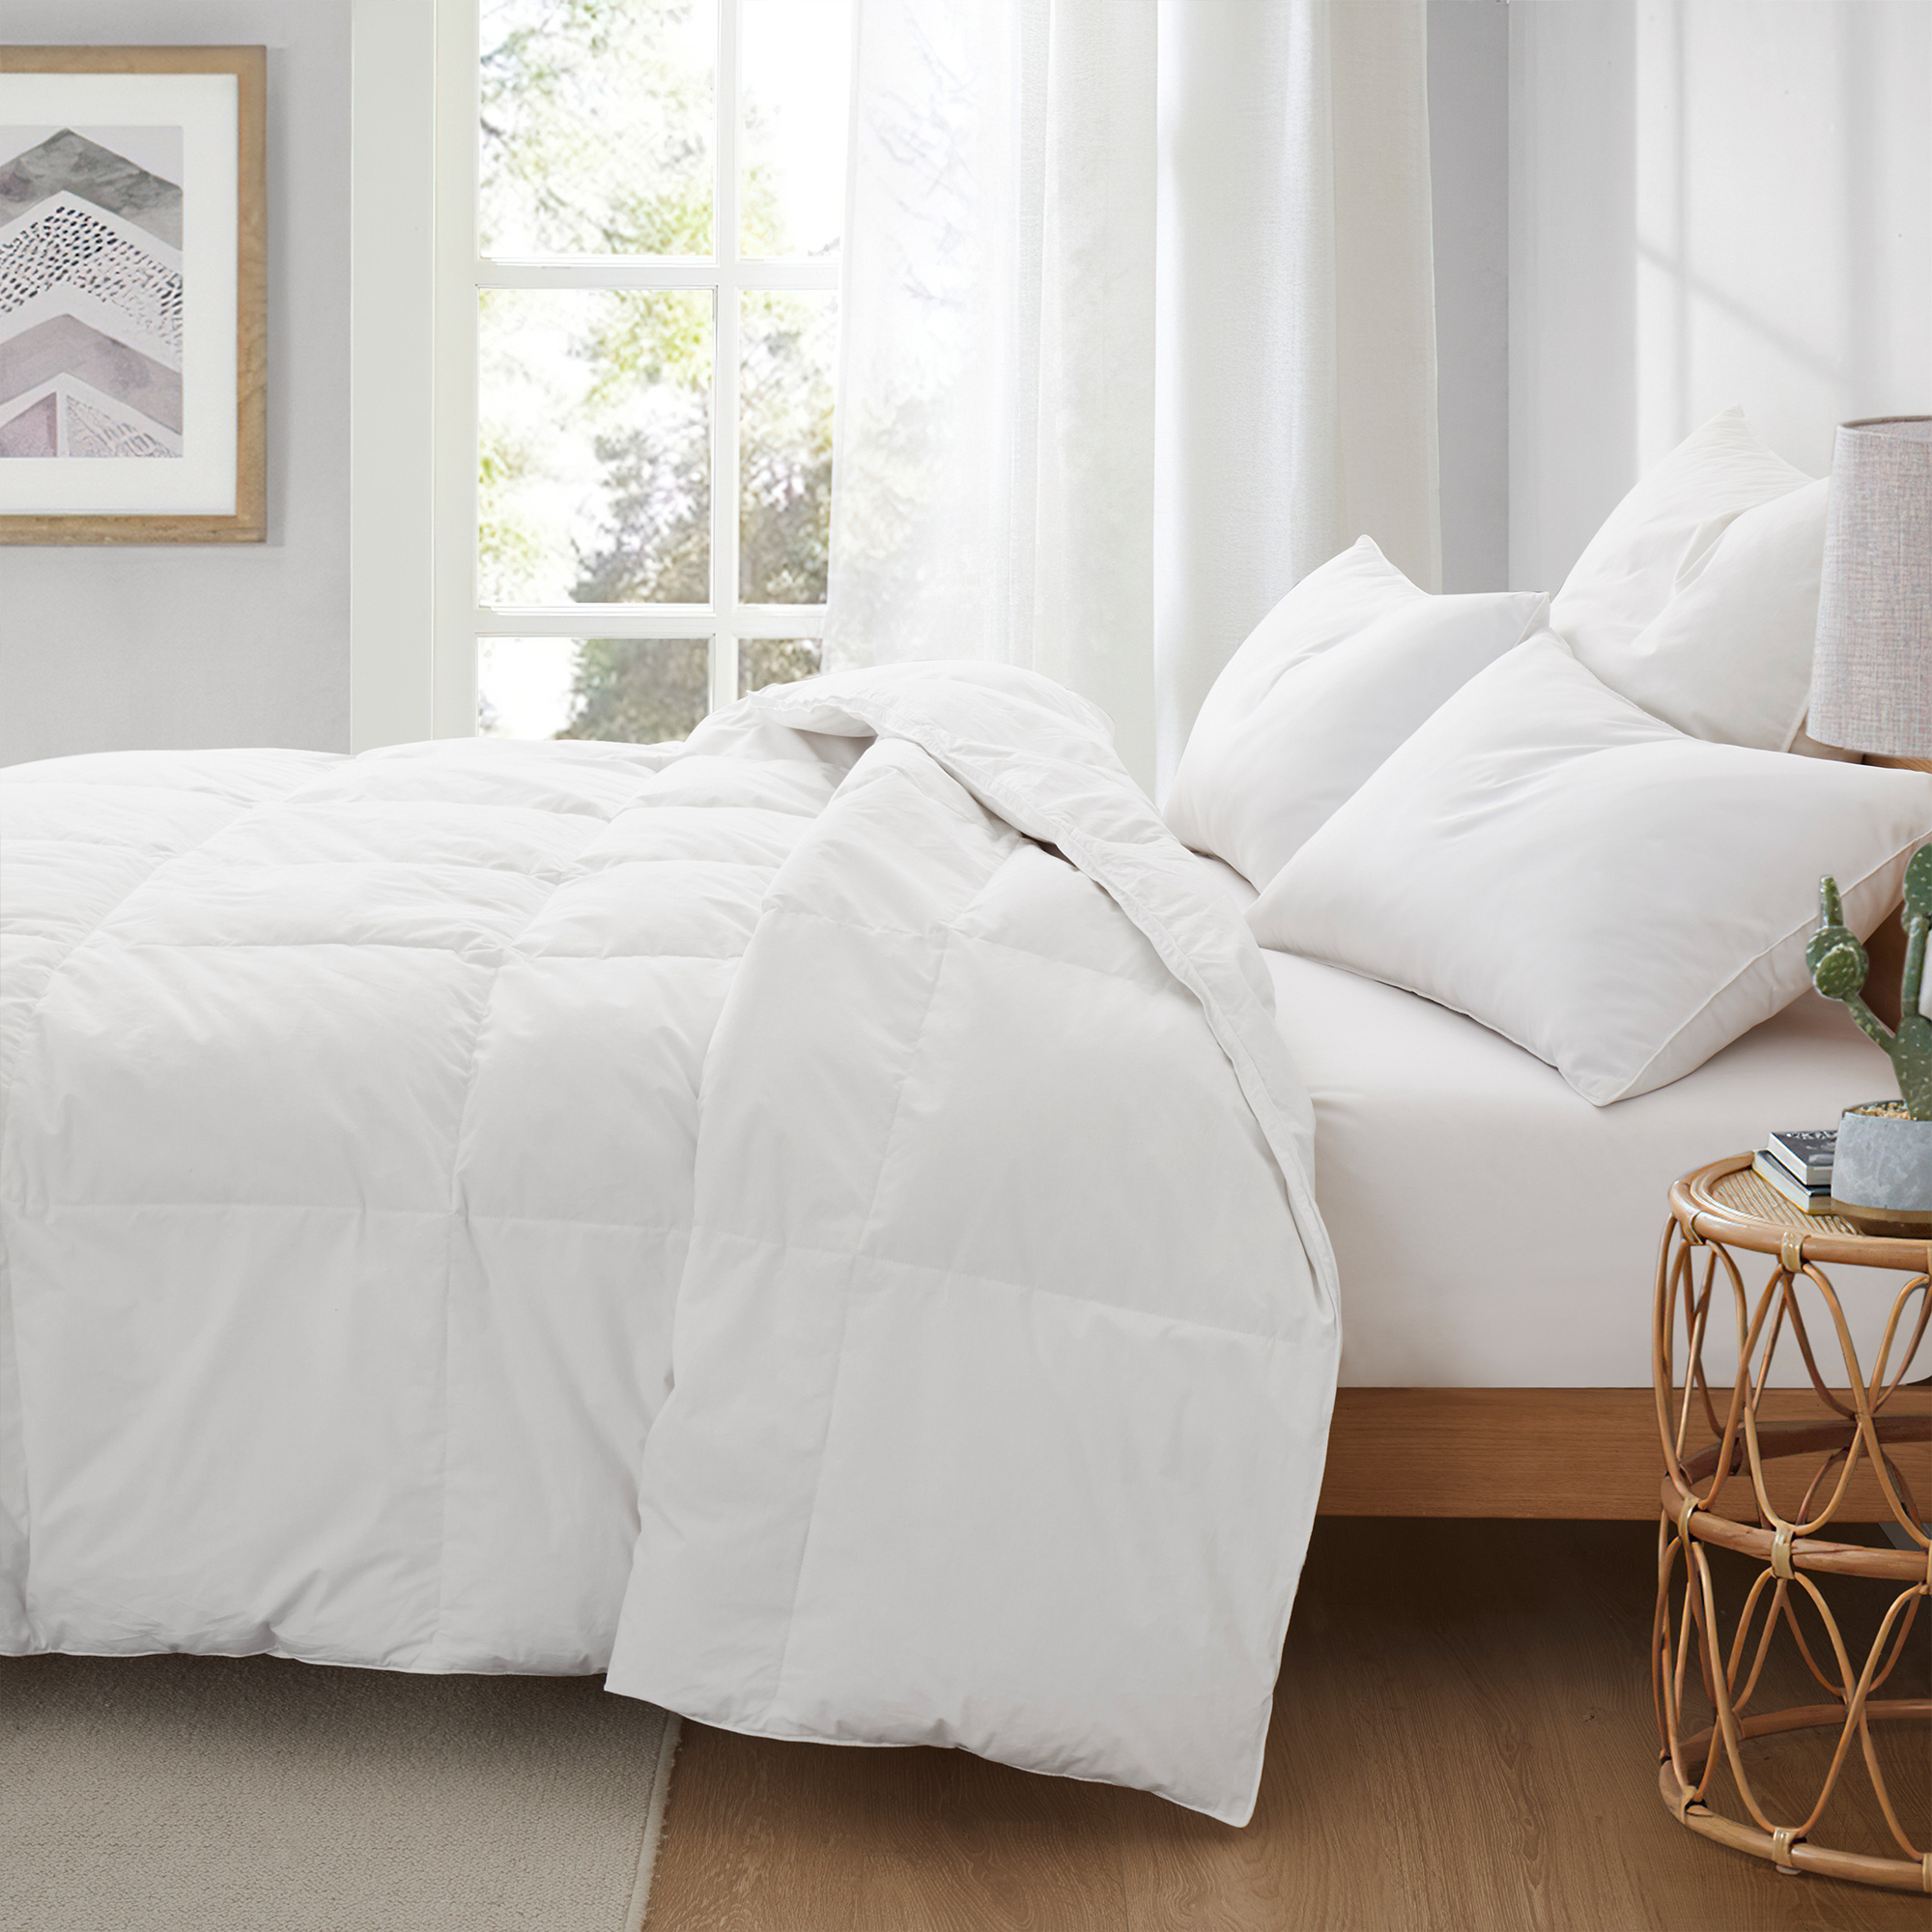 All Season White Goose Down And UltraFeather Comforter, Down Comforter King, Full And Twin Size - White, King